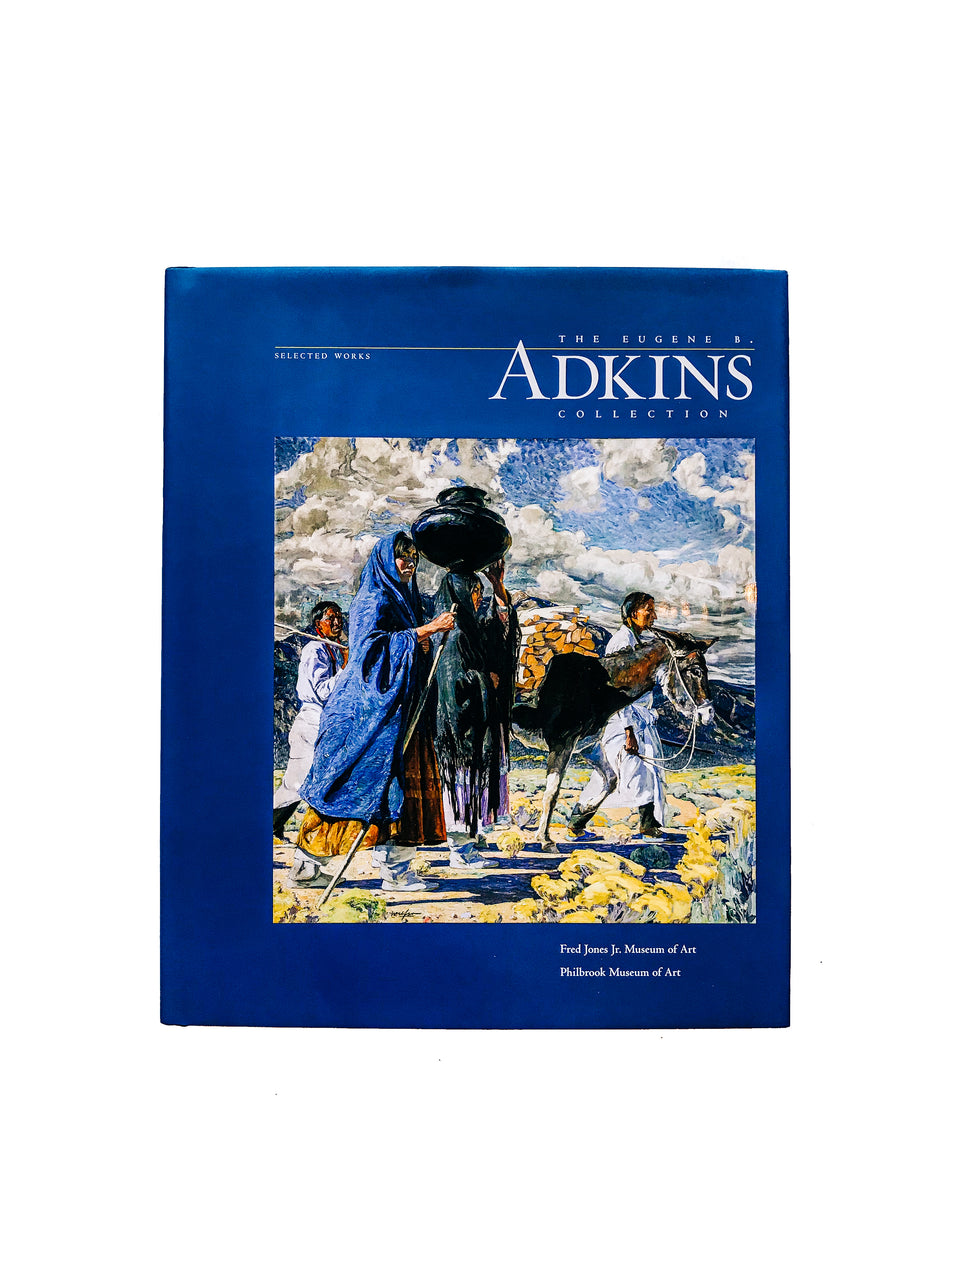 The Adkins Collection Catalogue